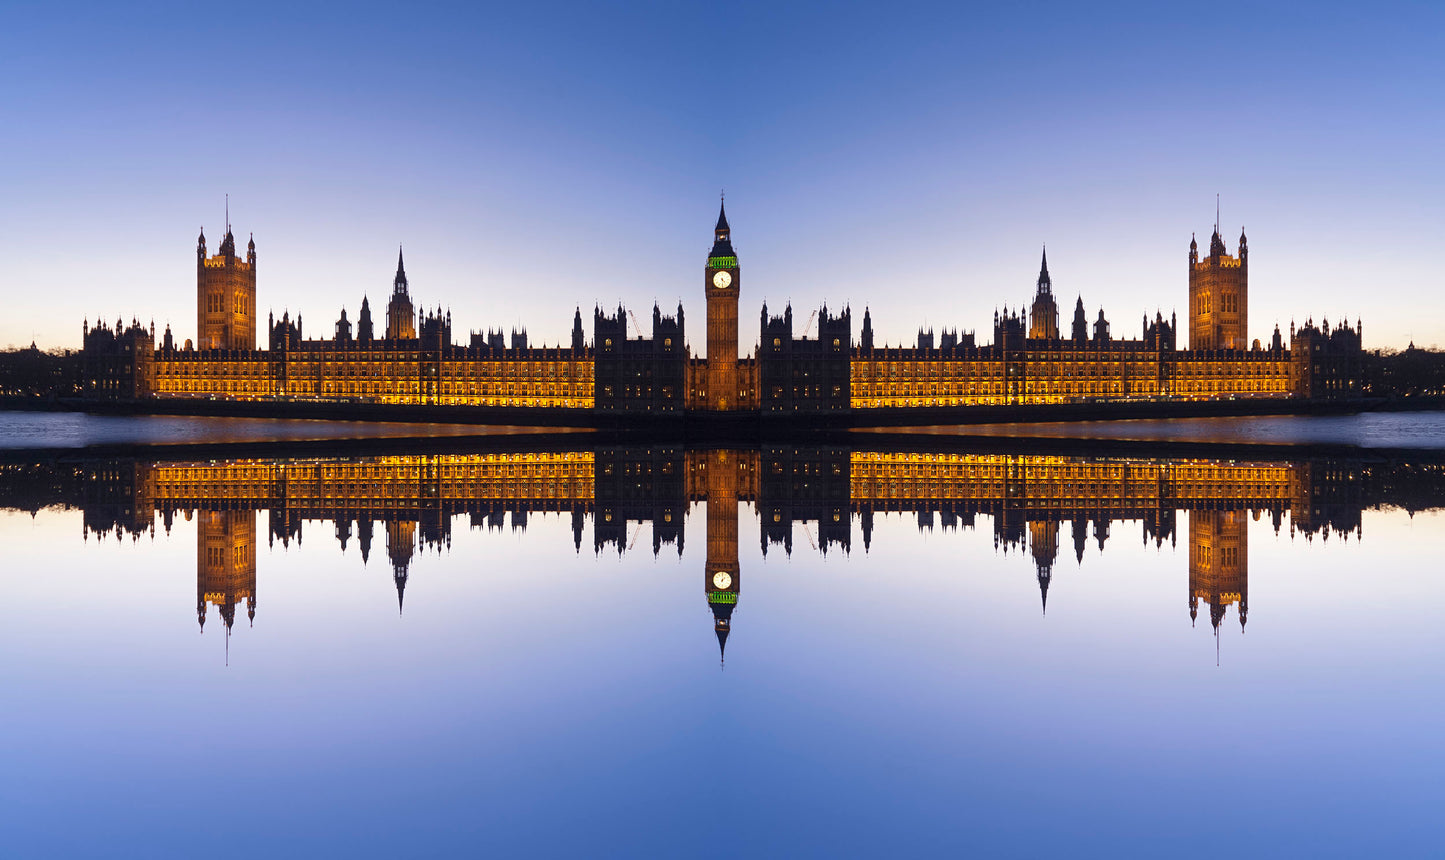 Daniel-Sambraus-Houses-Of-Parliament-Limited-Edition-TAP-Galleries, Essex gallery 